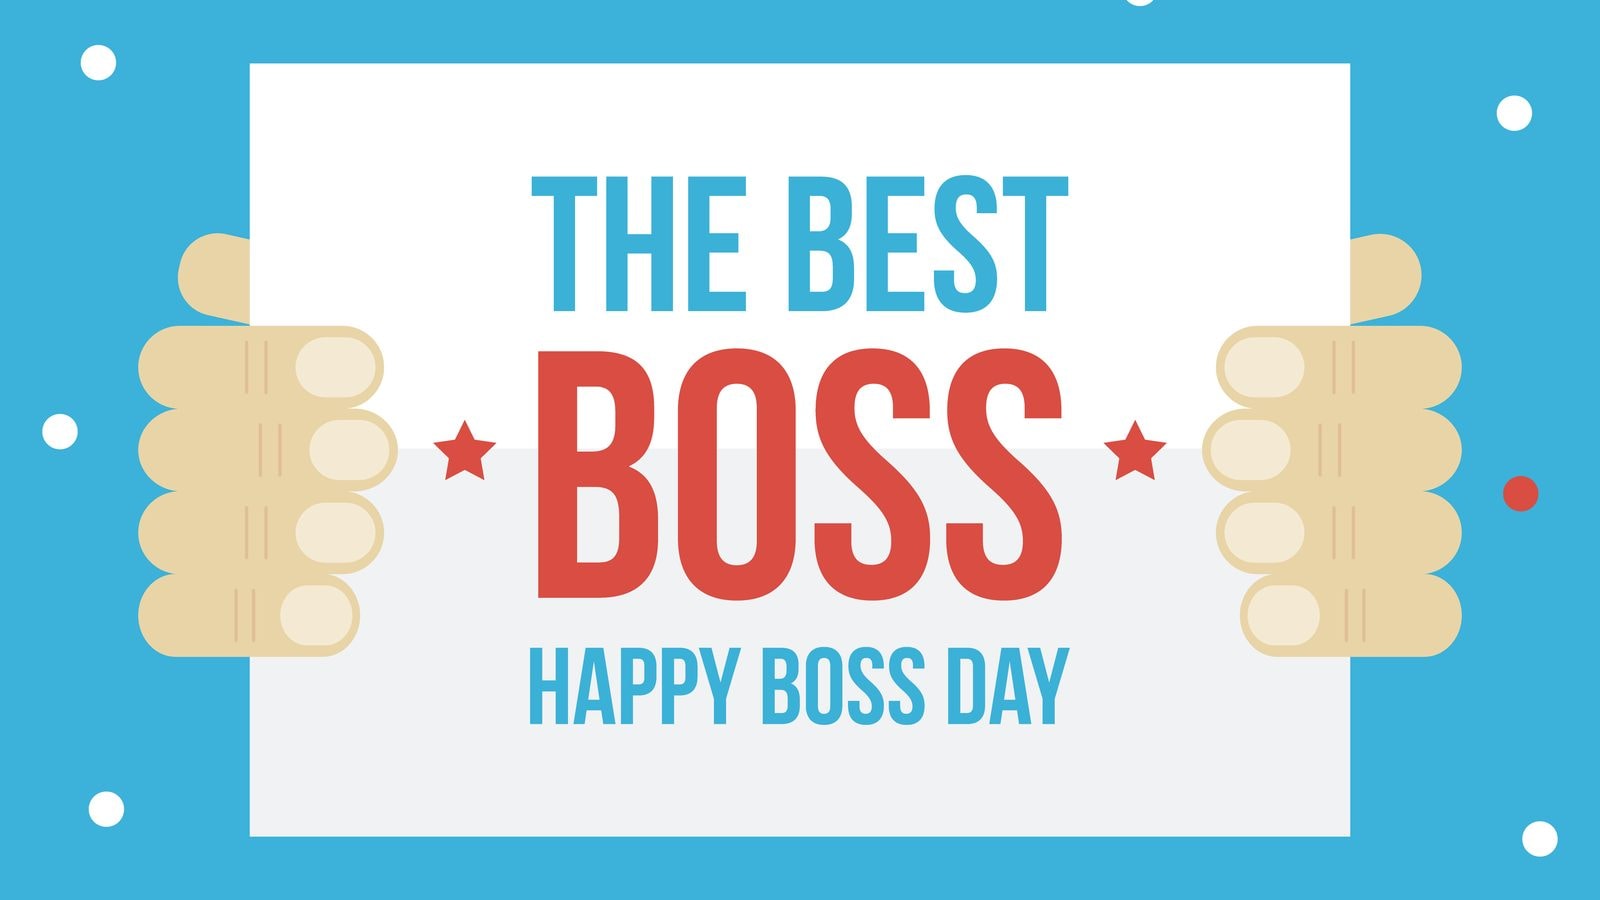 Happy Boss Day 2021 Images, Wishes, Quotes, Messages and WhatsApp